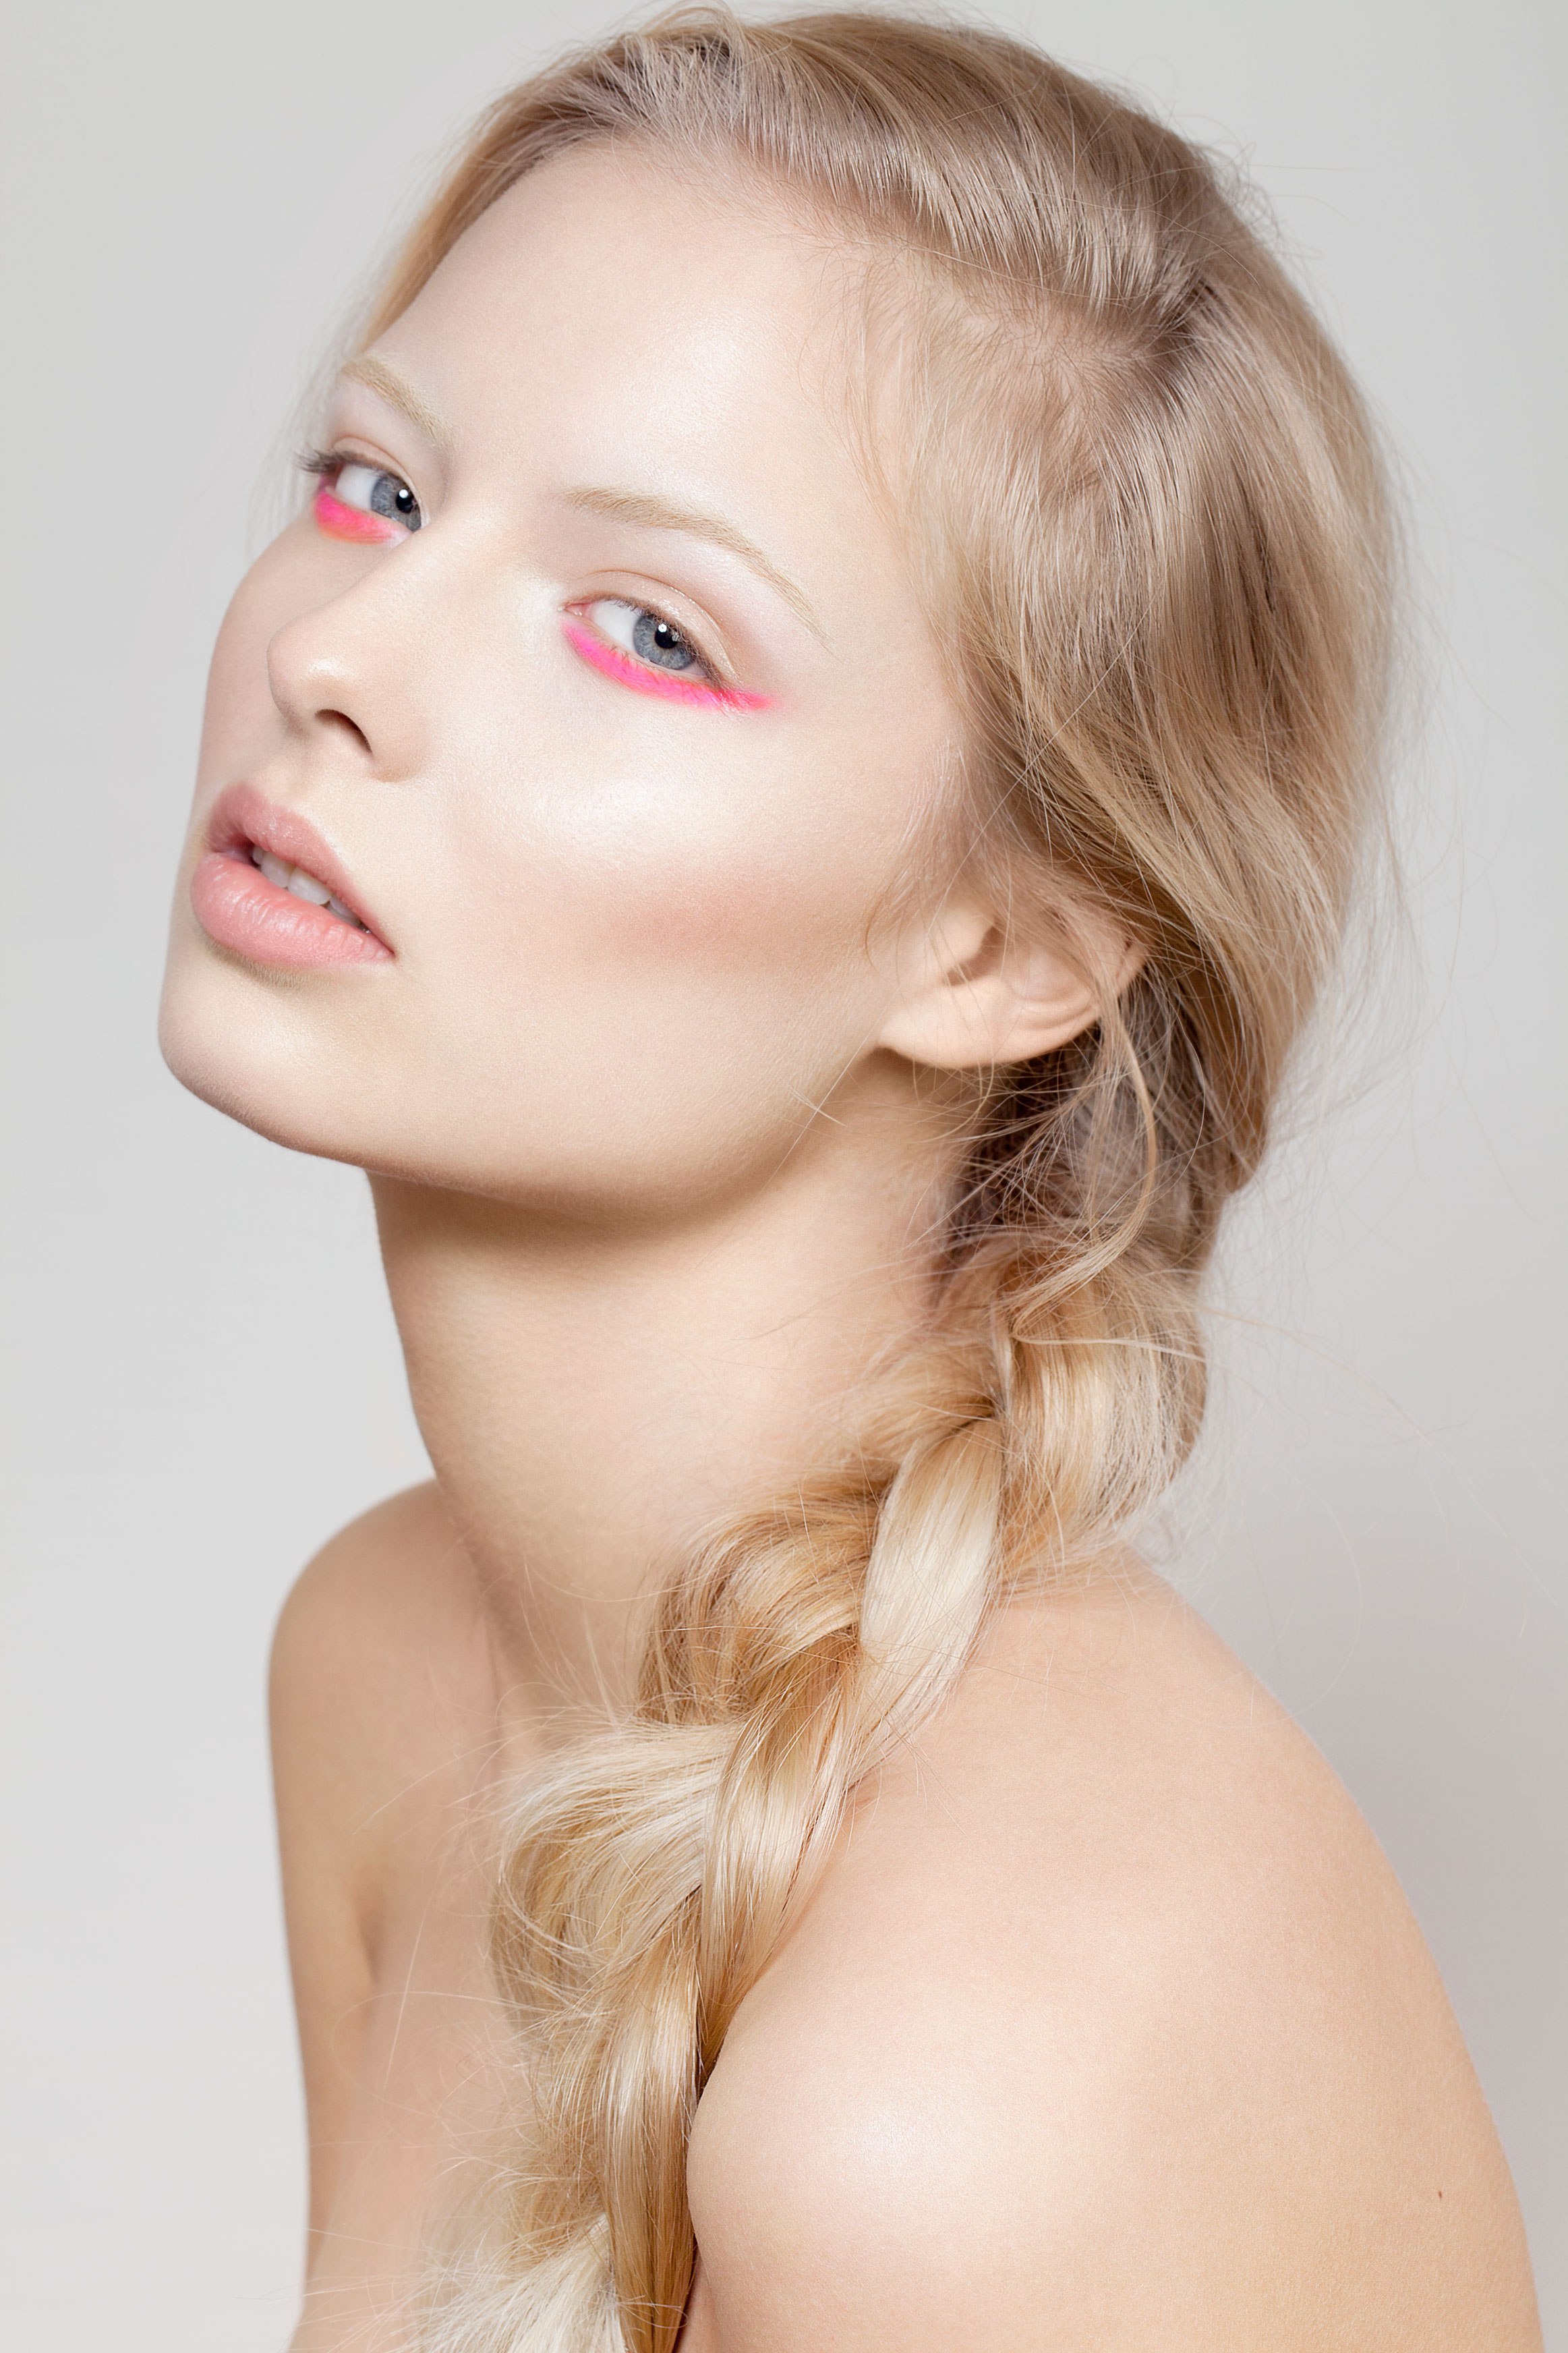 margaux-milk-beauty-shoot-muted-maiden-photography-skin-bleached-brows-blonde-ruth-rose-london-5